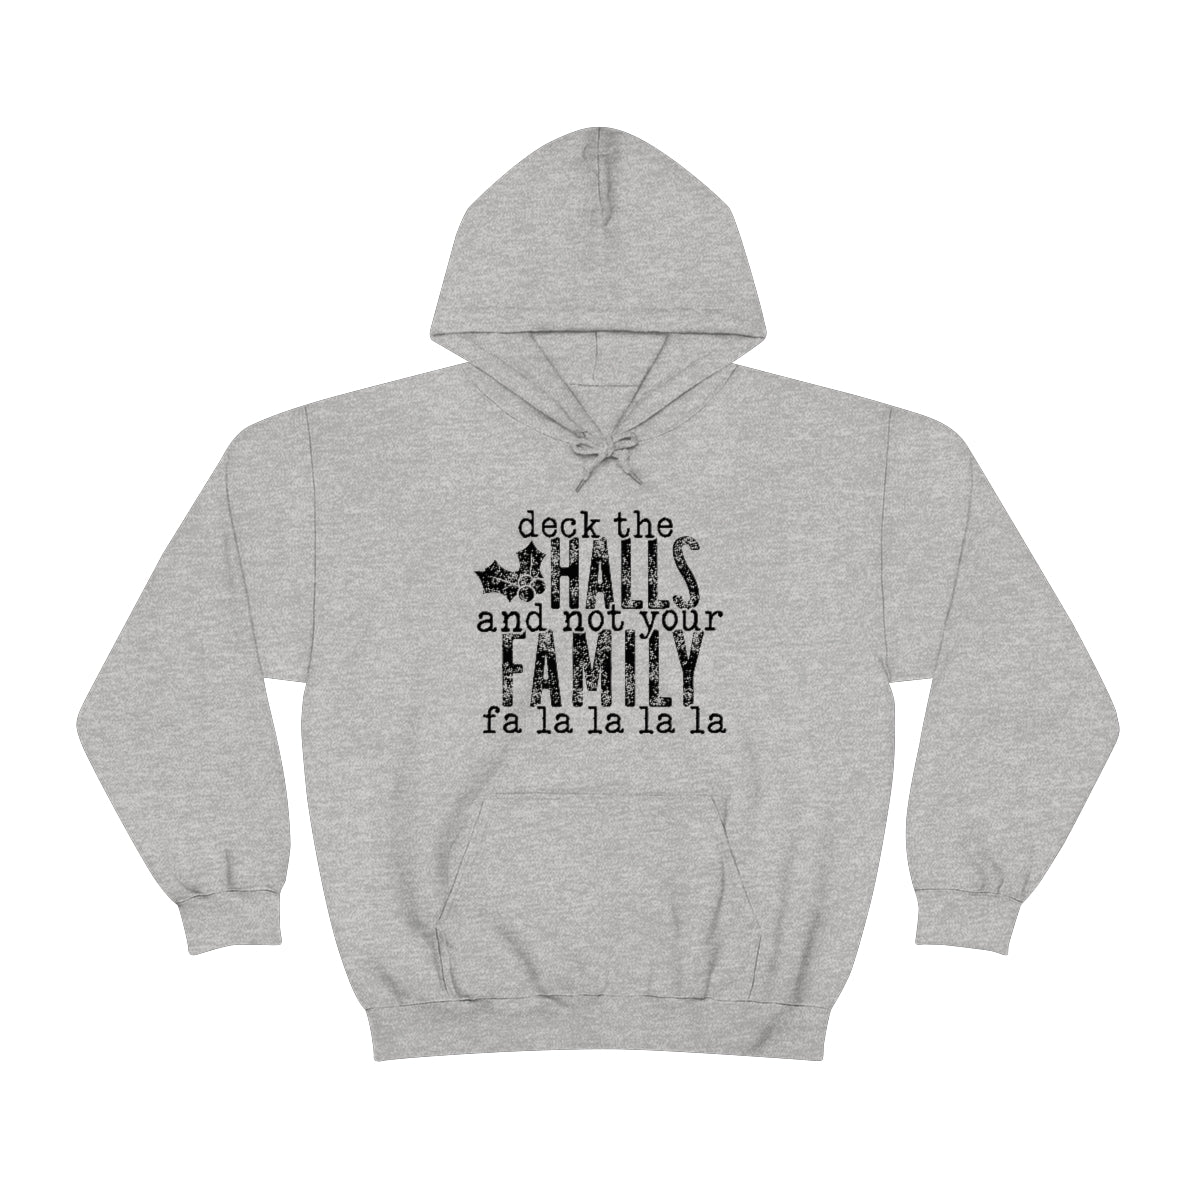 Not Your Family Hoodie